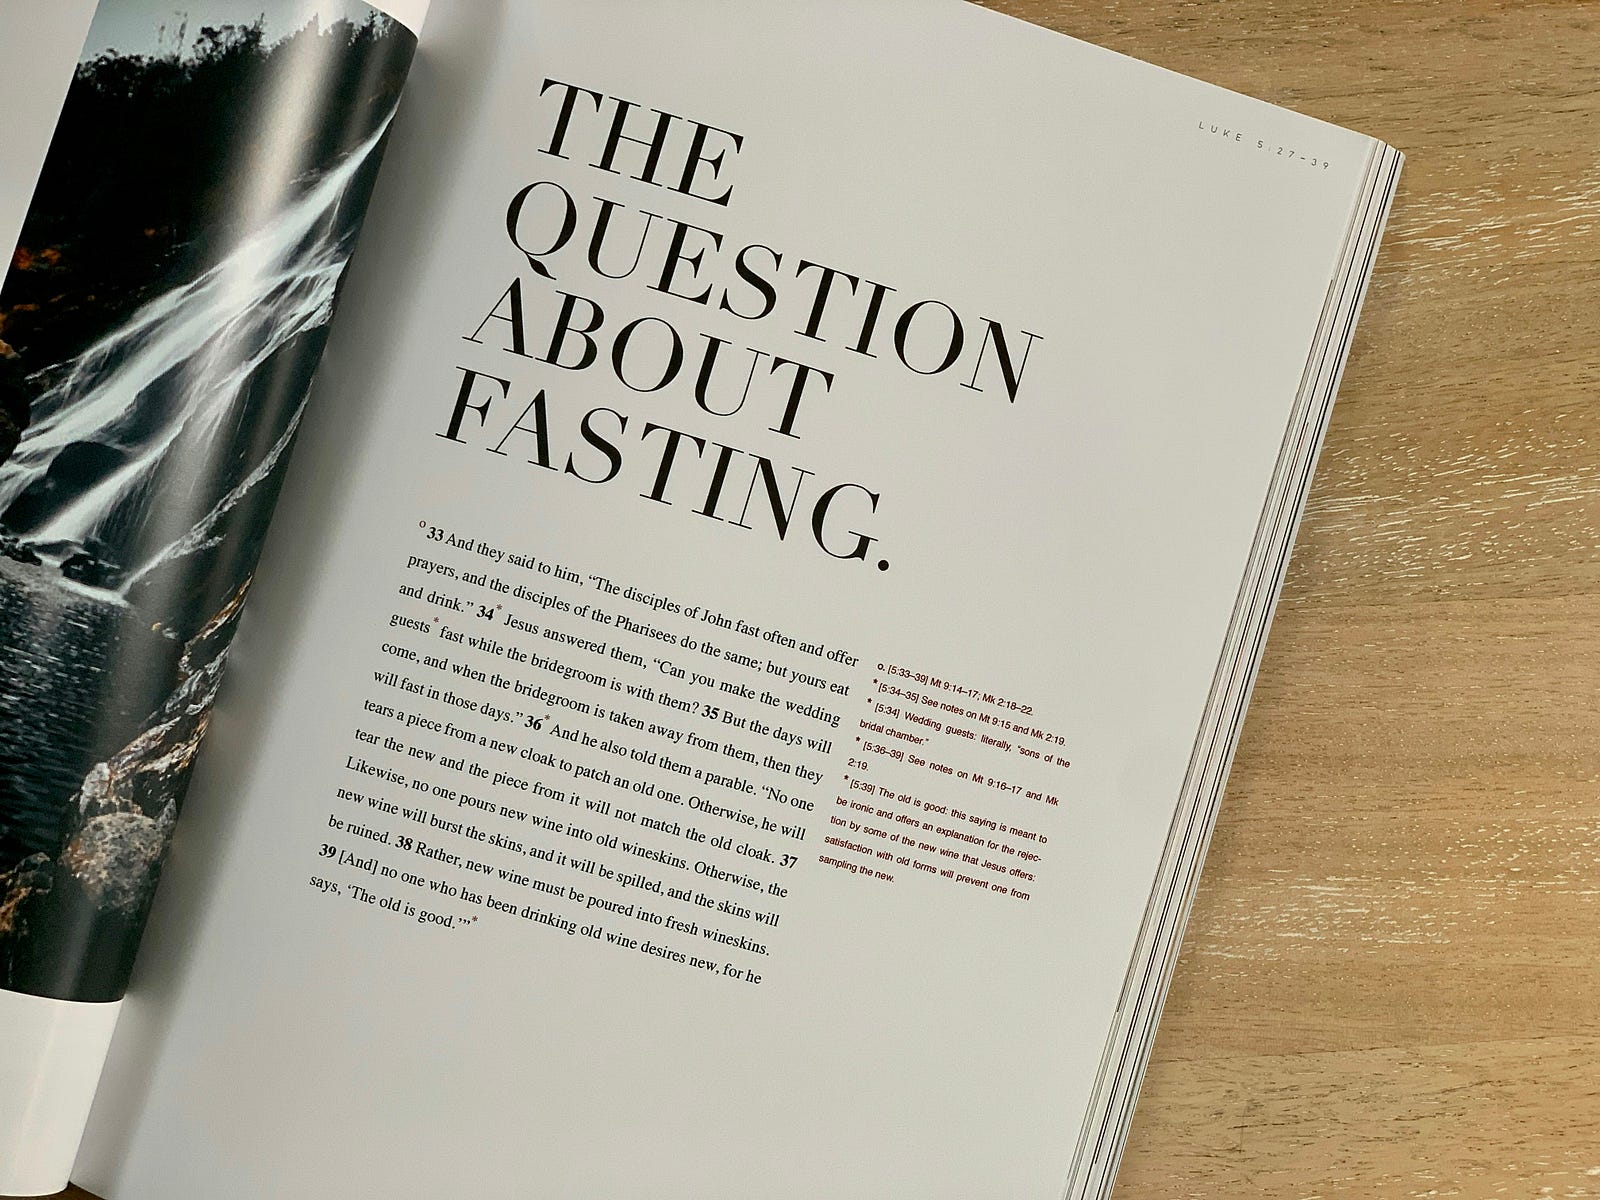 A book is open and we see this chapter heading: “THE QUESTION OF FASTING.”